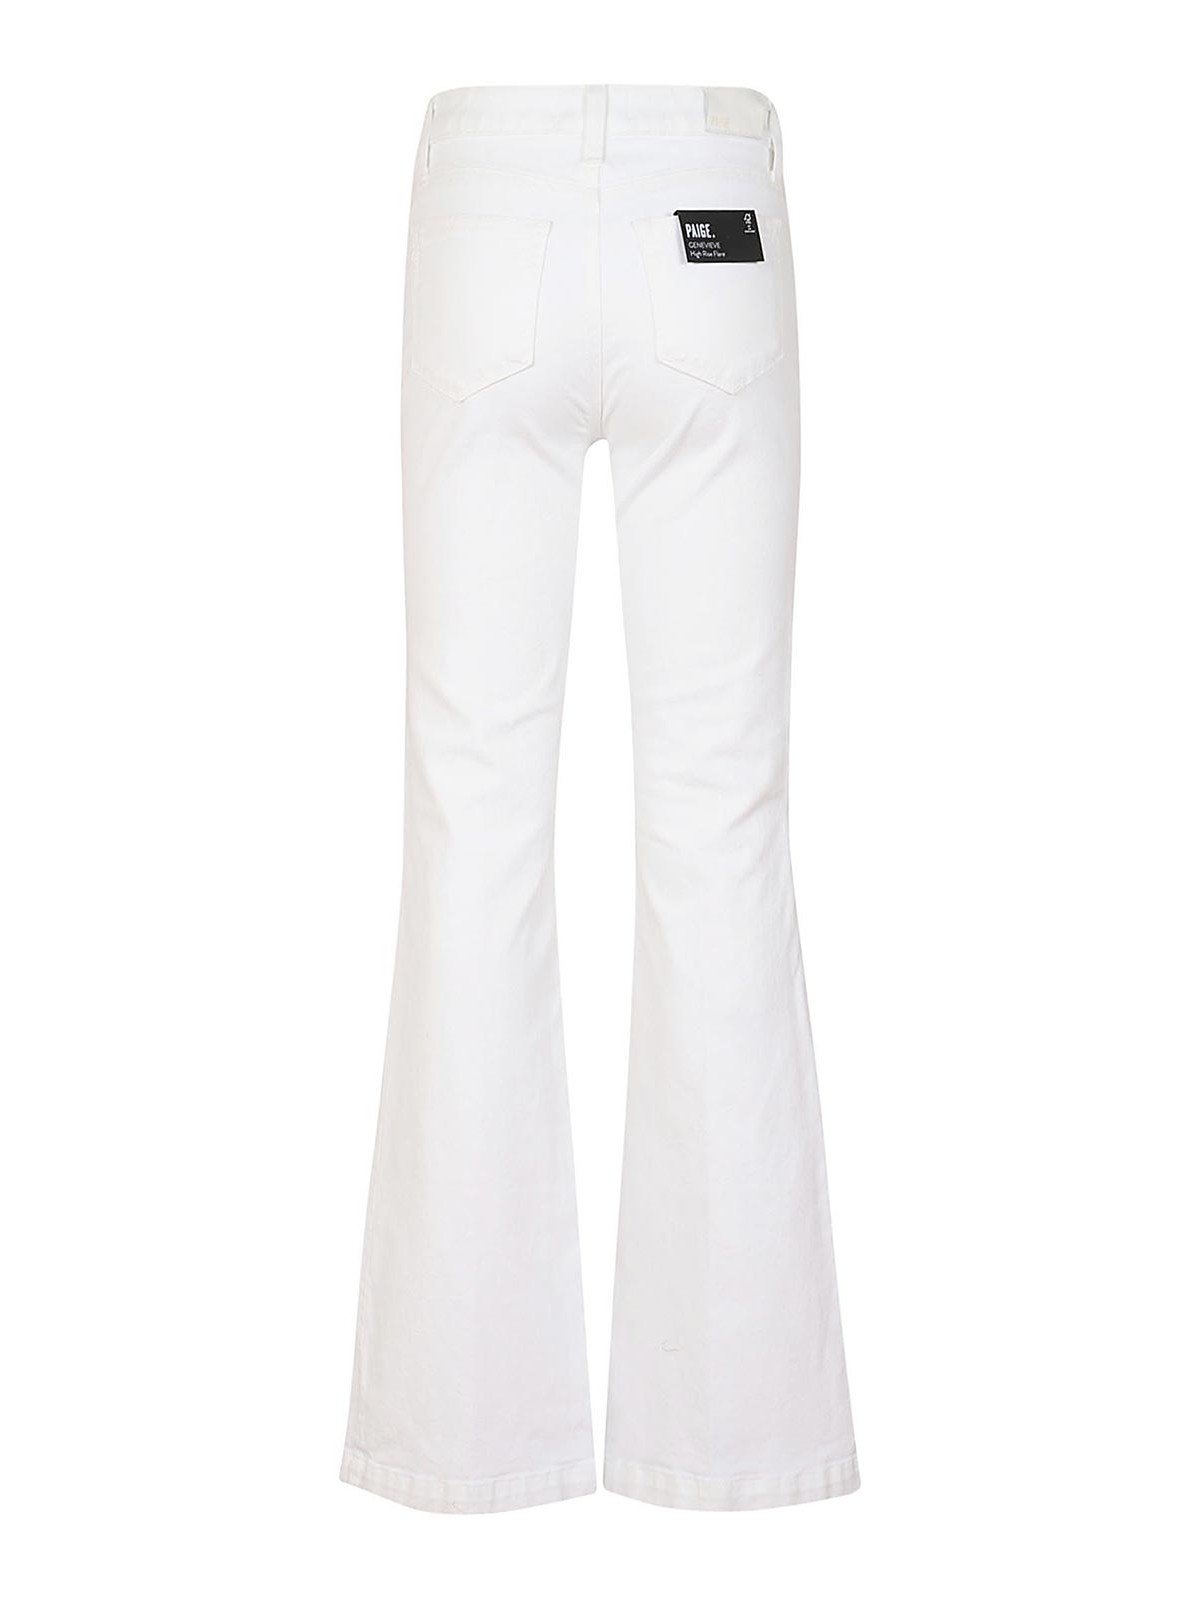 Shop Paige Jeans Pockets In White